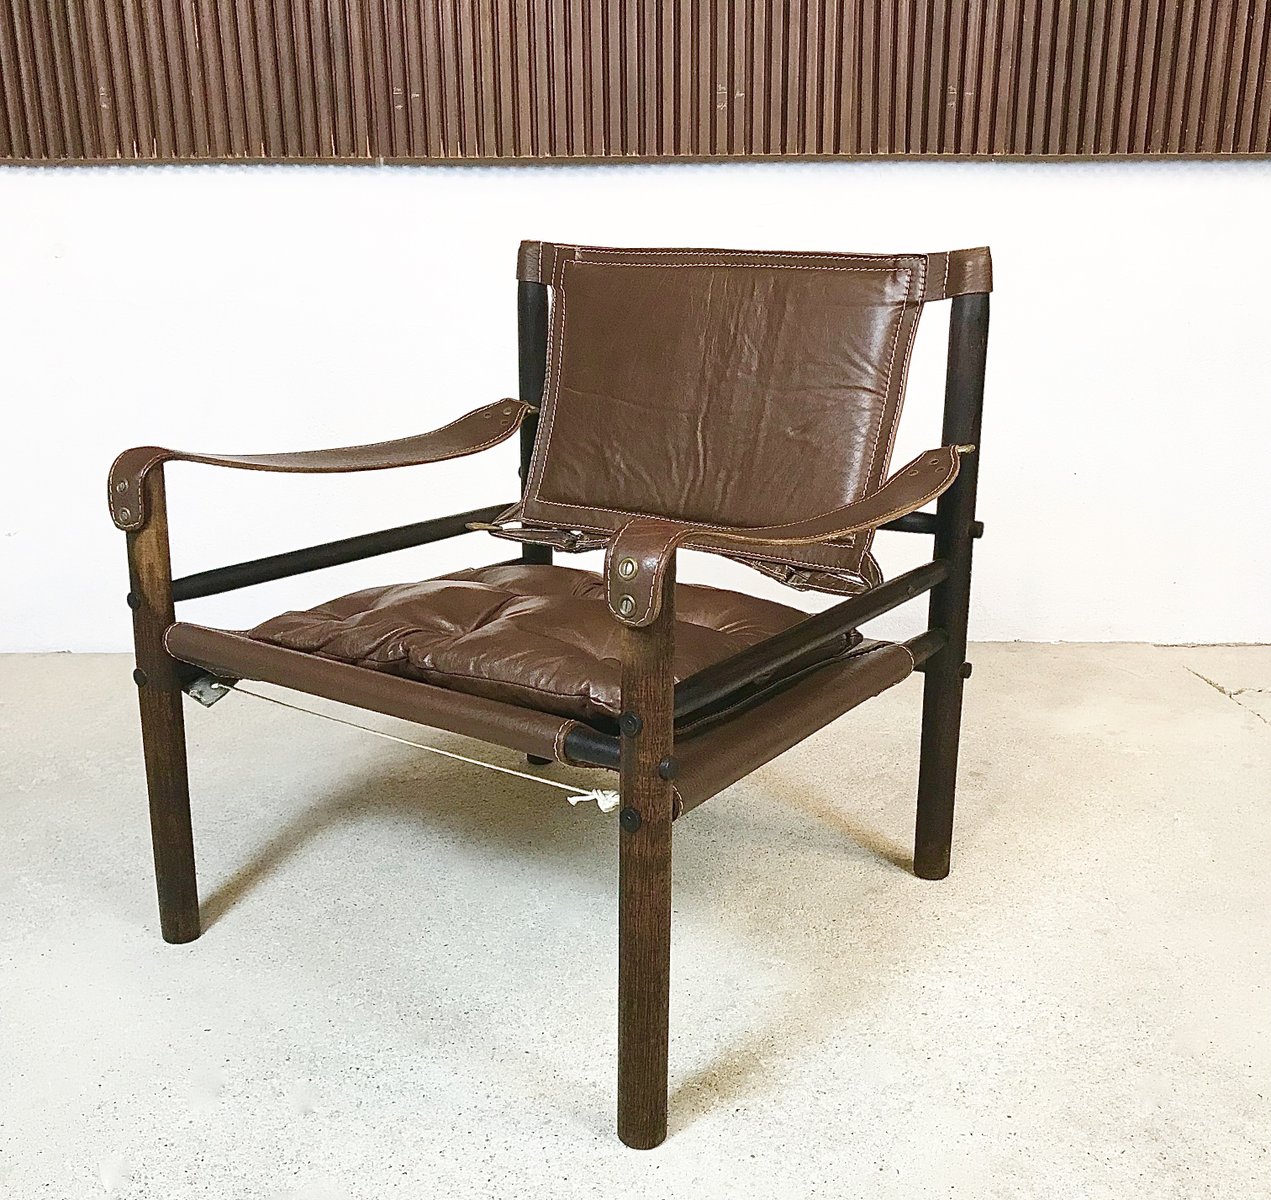 Sirocco Leather Safari Chair by Arne Norell, 1960s for